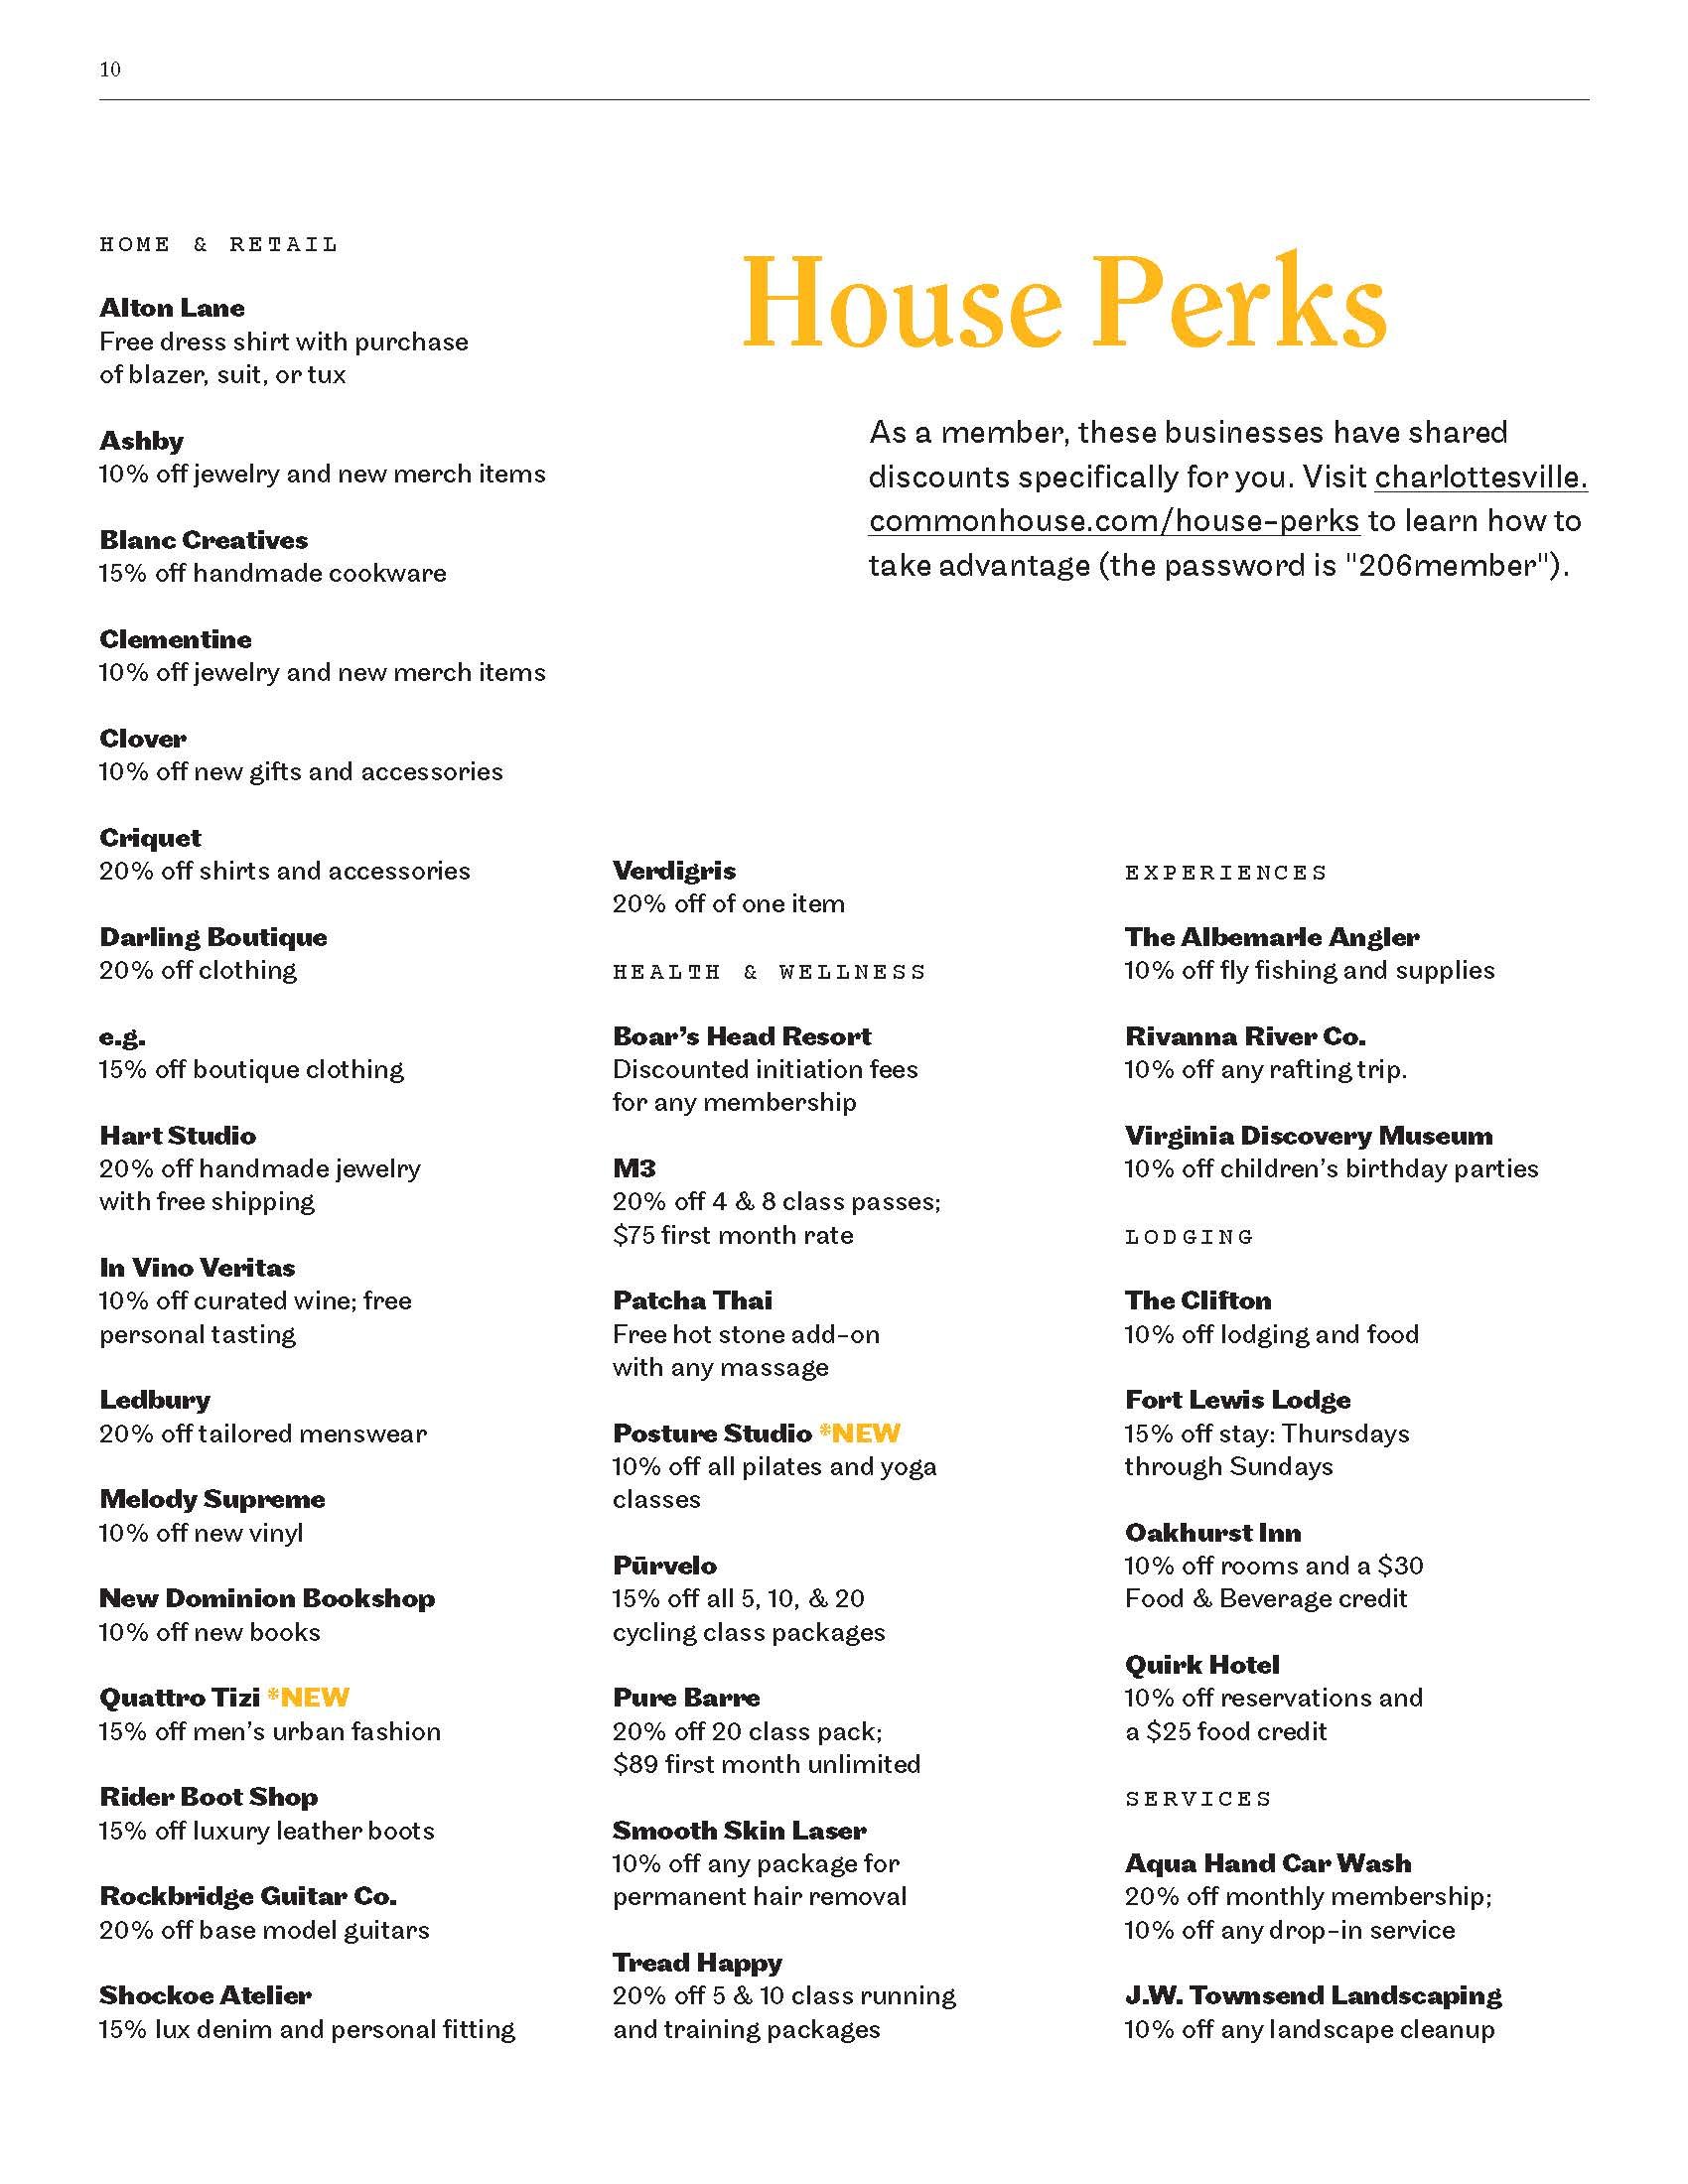 4 Common-House-newsletter-19-03_Feb19-Press2_Page_12.jpg